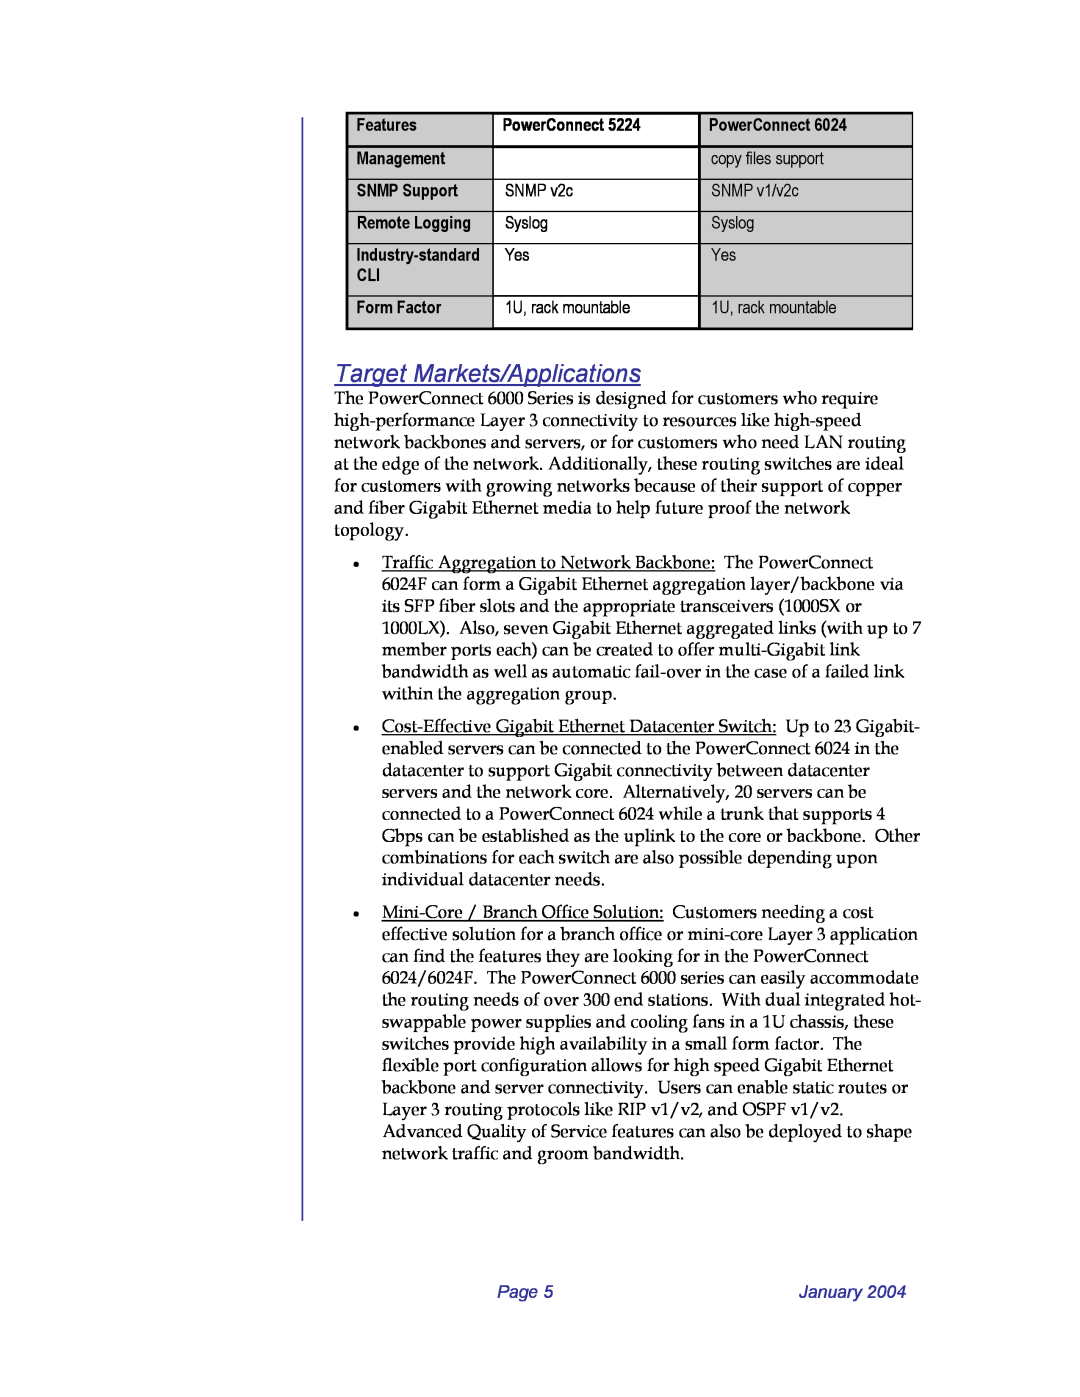 Dell 6024F manual Target Markets/Applications, Page, January 